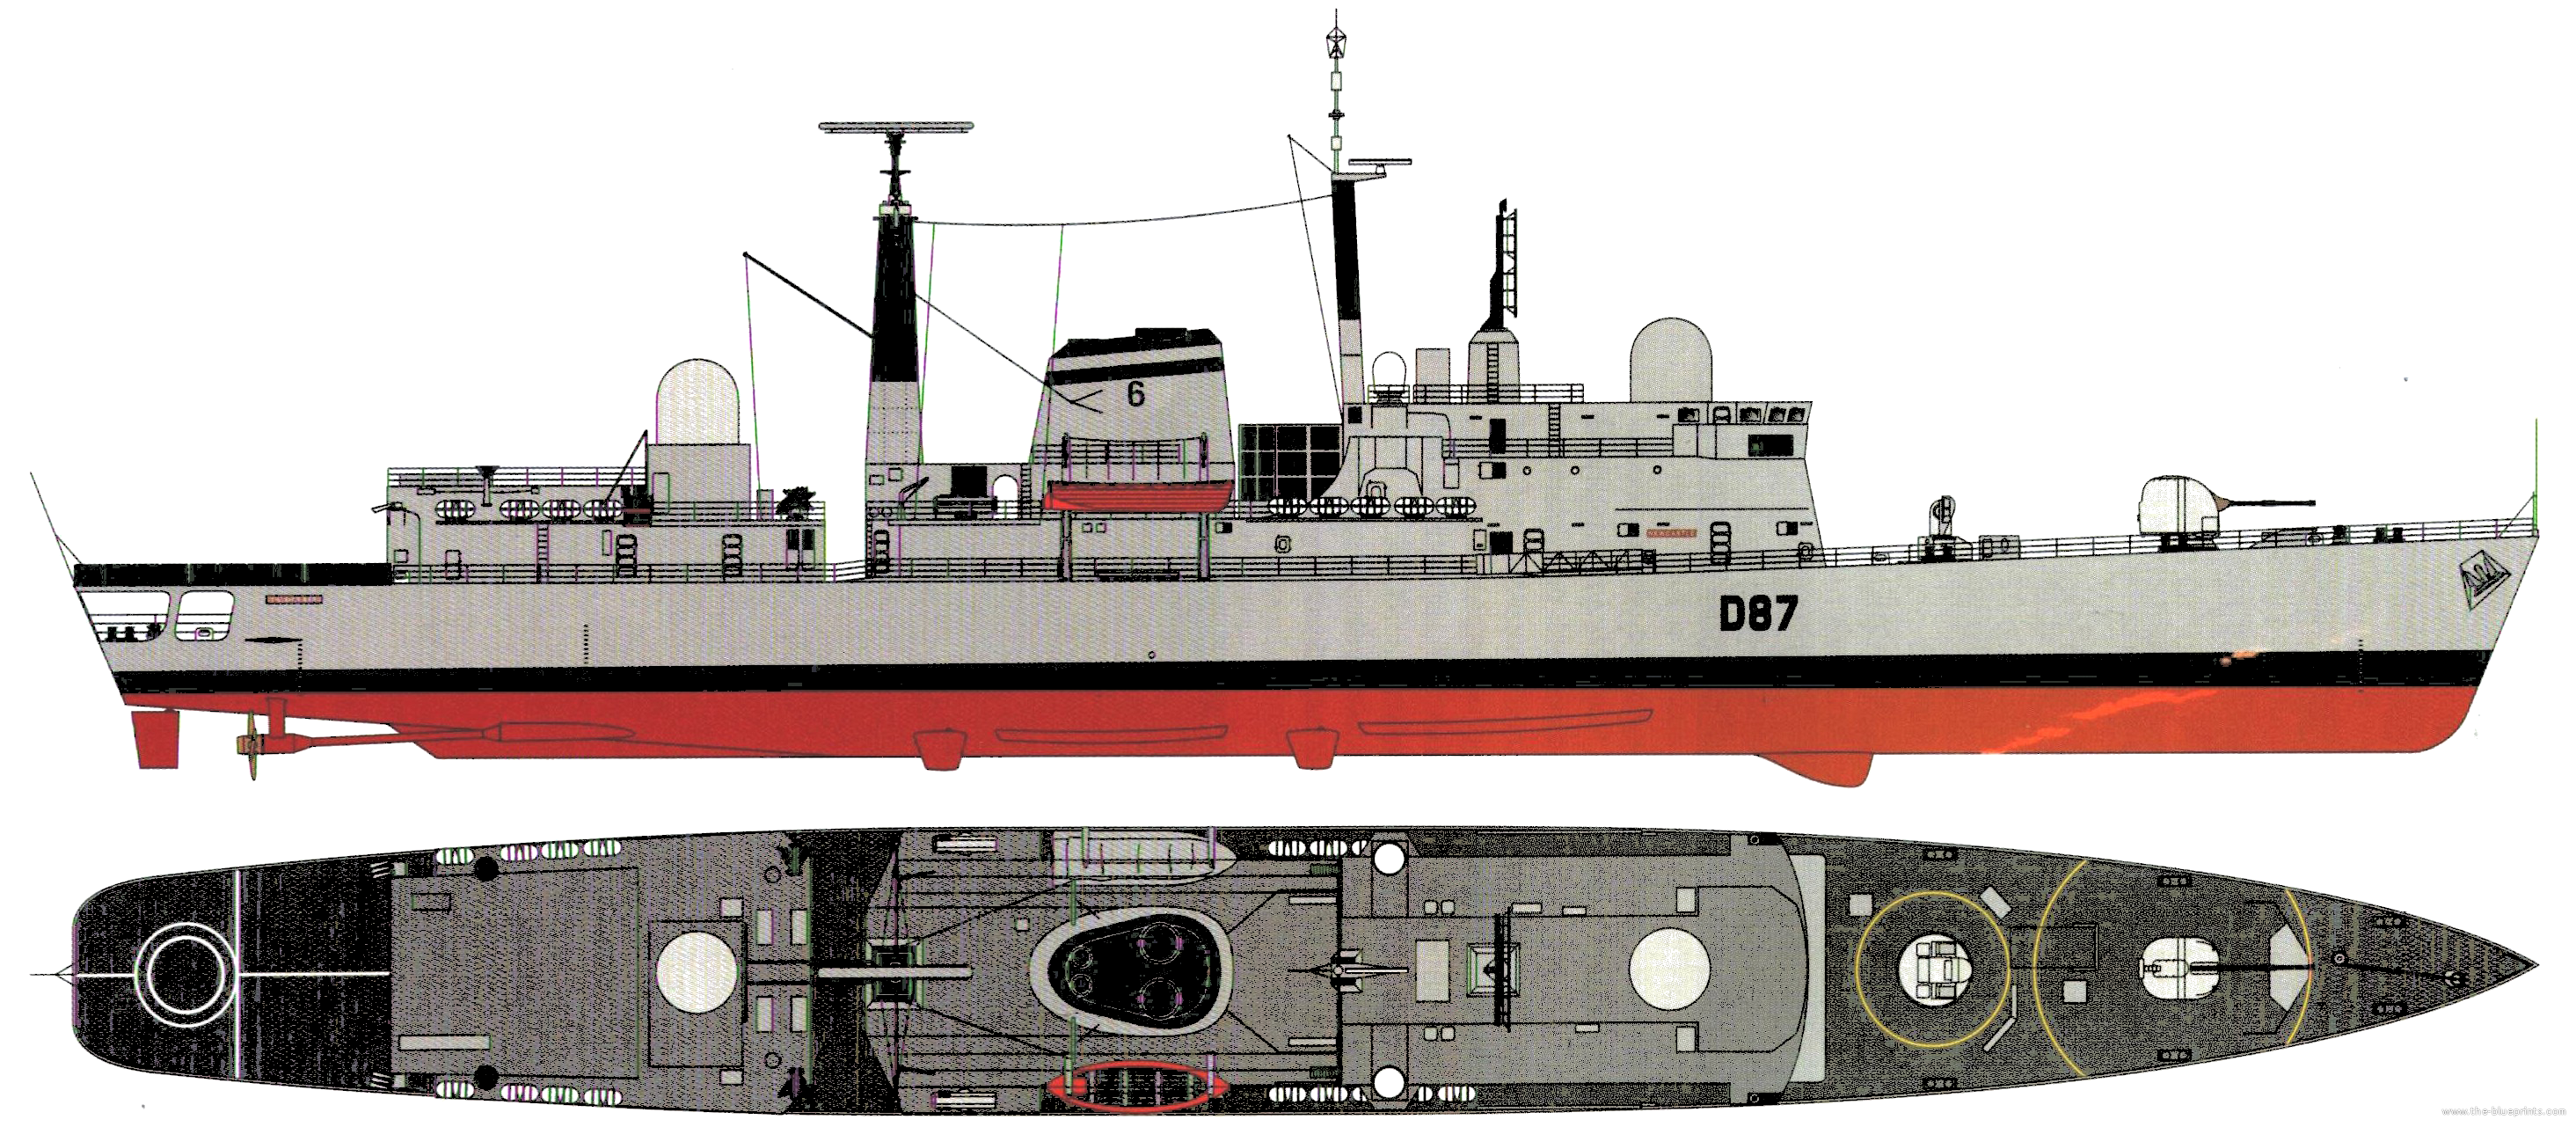 hms-newcastle-d87-type-42-destroyer.png